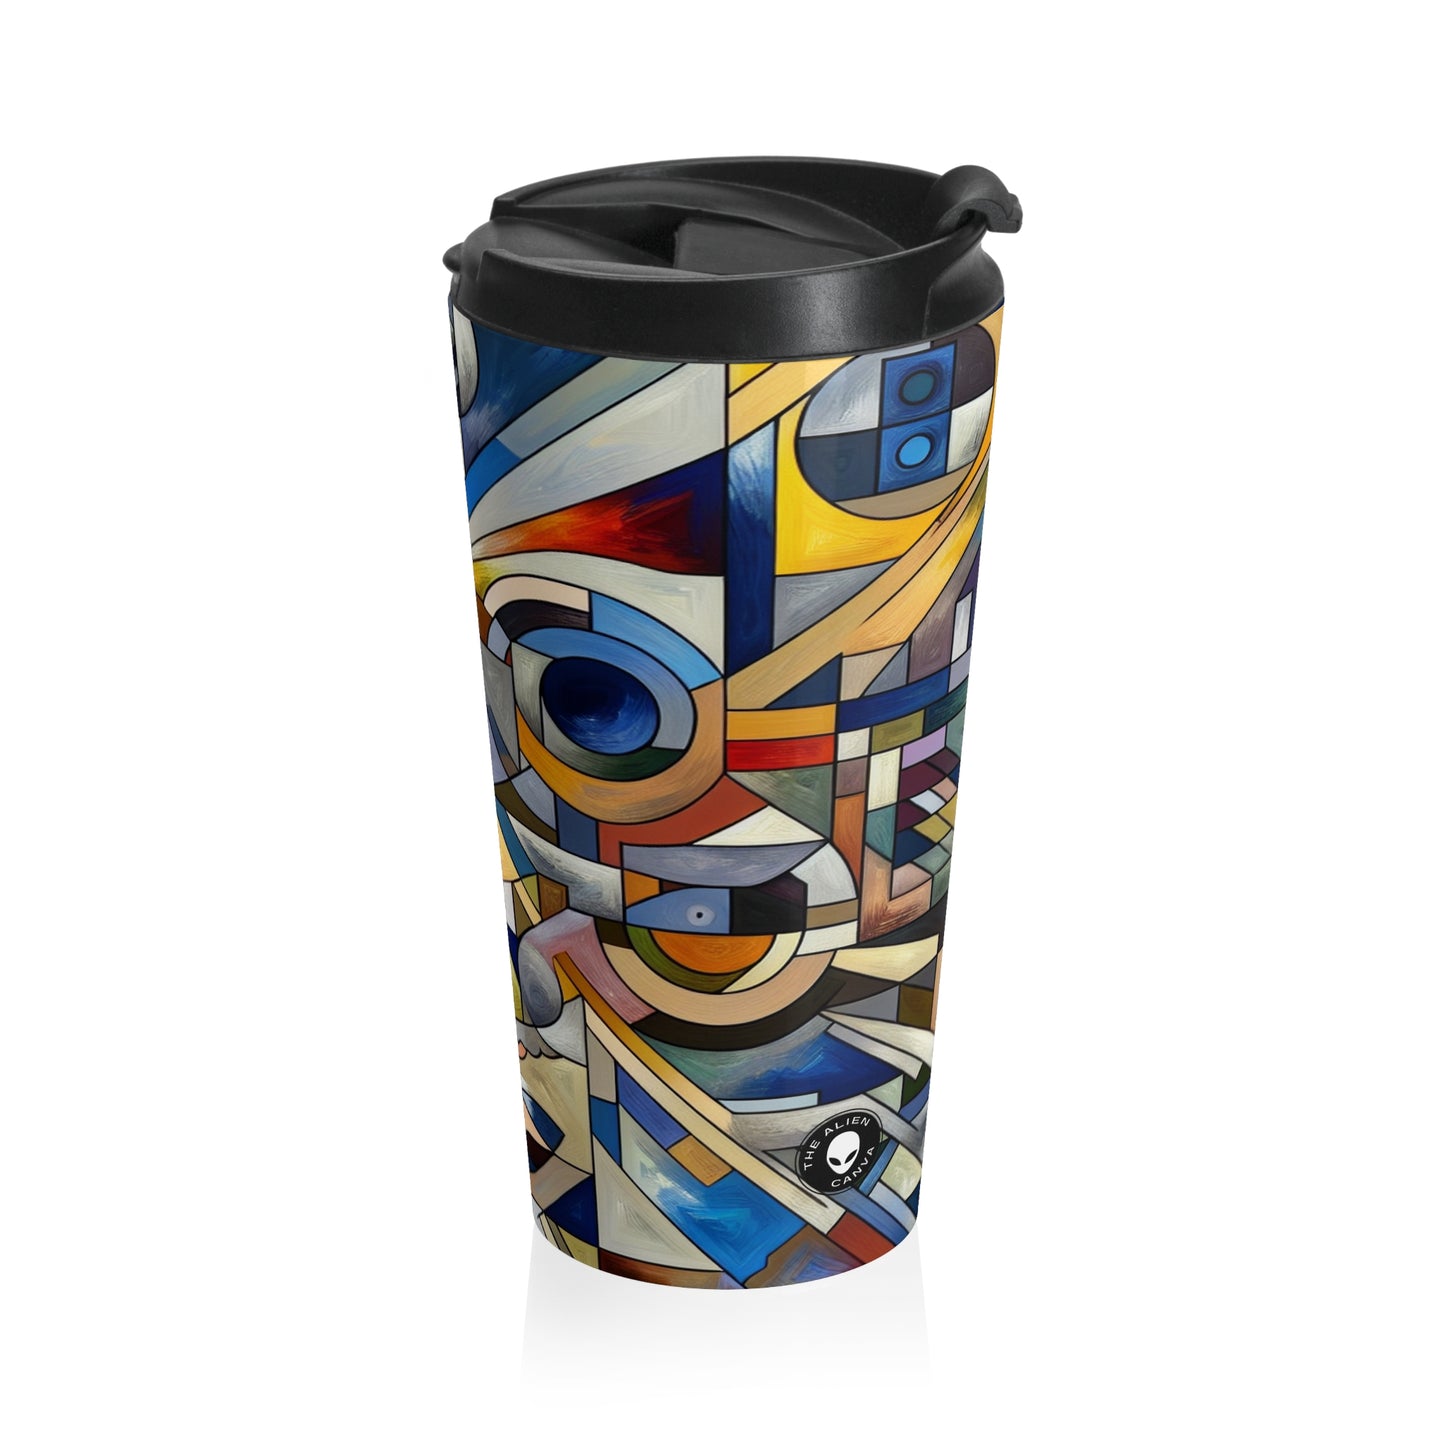 "Urban Fragmentation: An Analytical Cubist Cityscape" - The Alien Stainless Steel Travel Mug Analytical Cubism